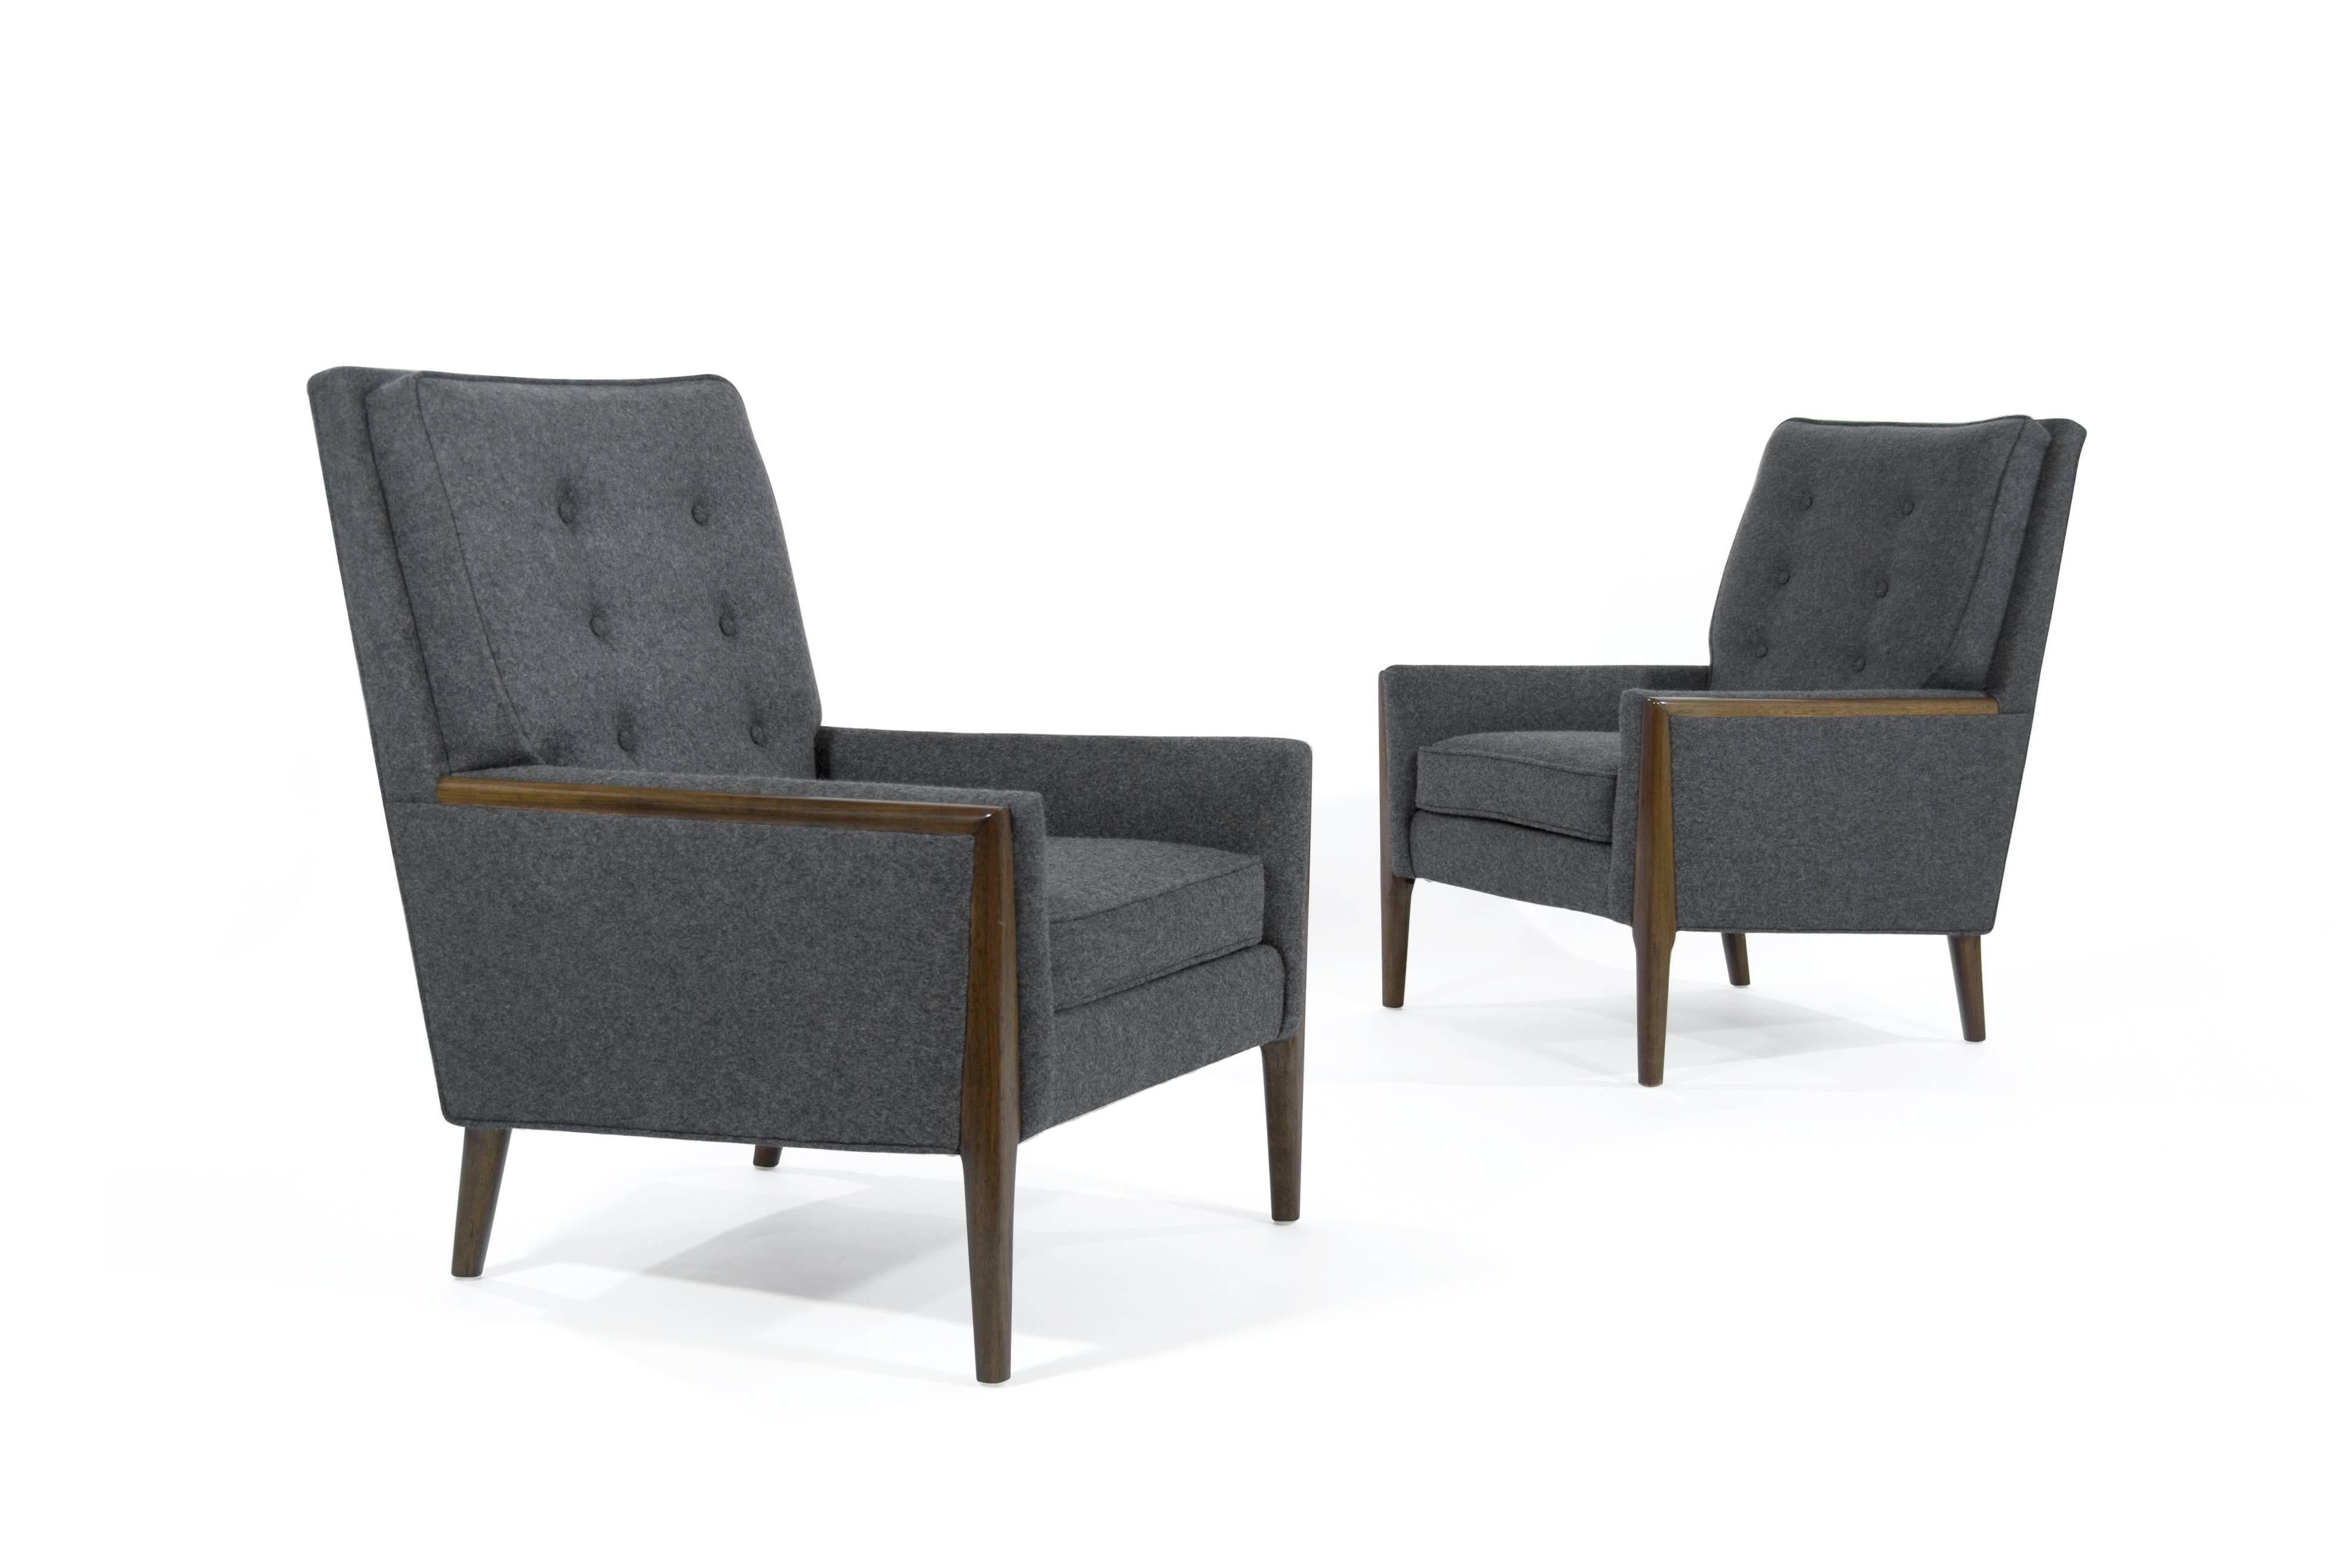 Comfortable pair of high back lounge chairs in the style of T.H. Robsjohn-Gibbings. Walnut trim fully restored, newly upholstered in grey wool.